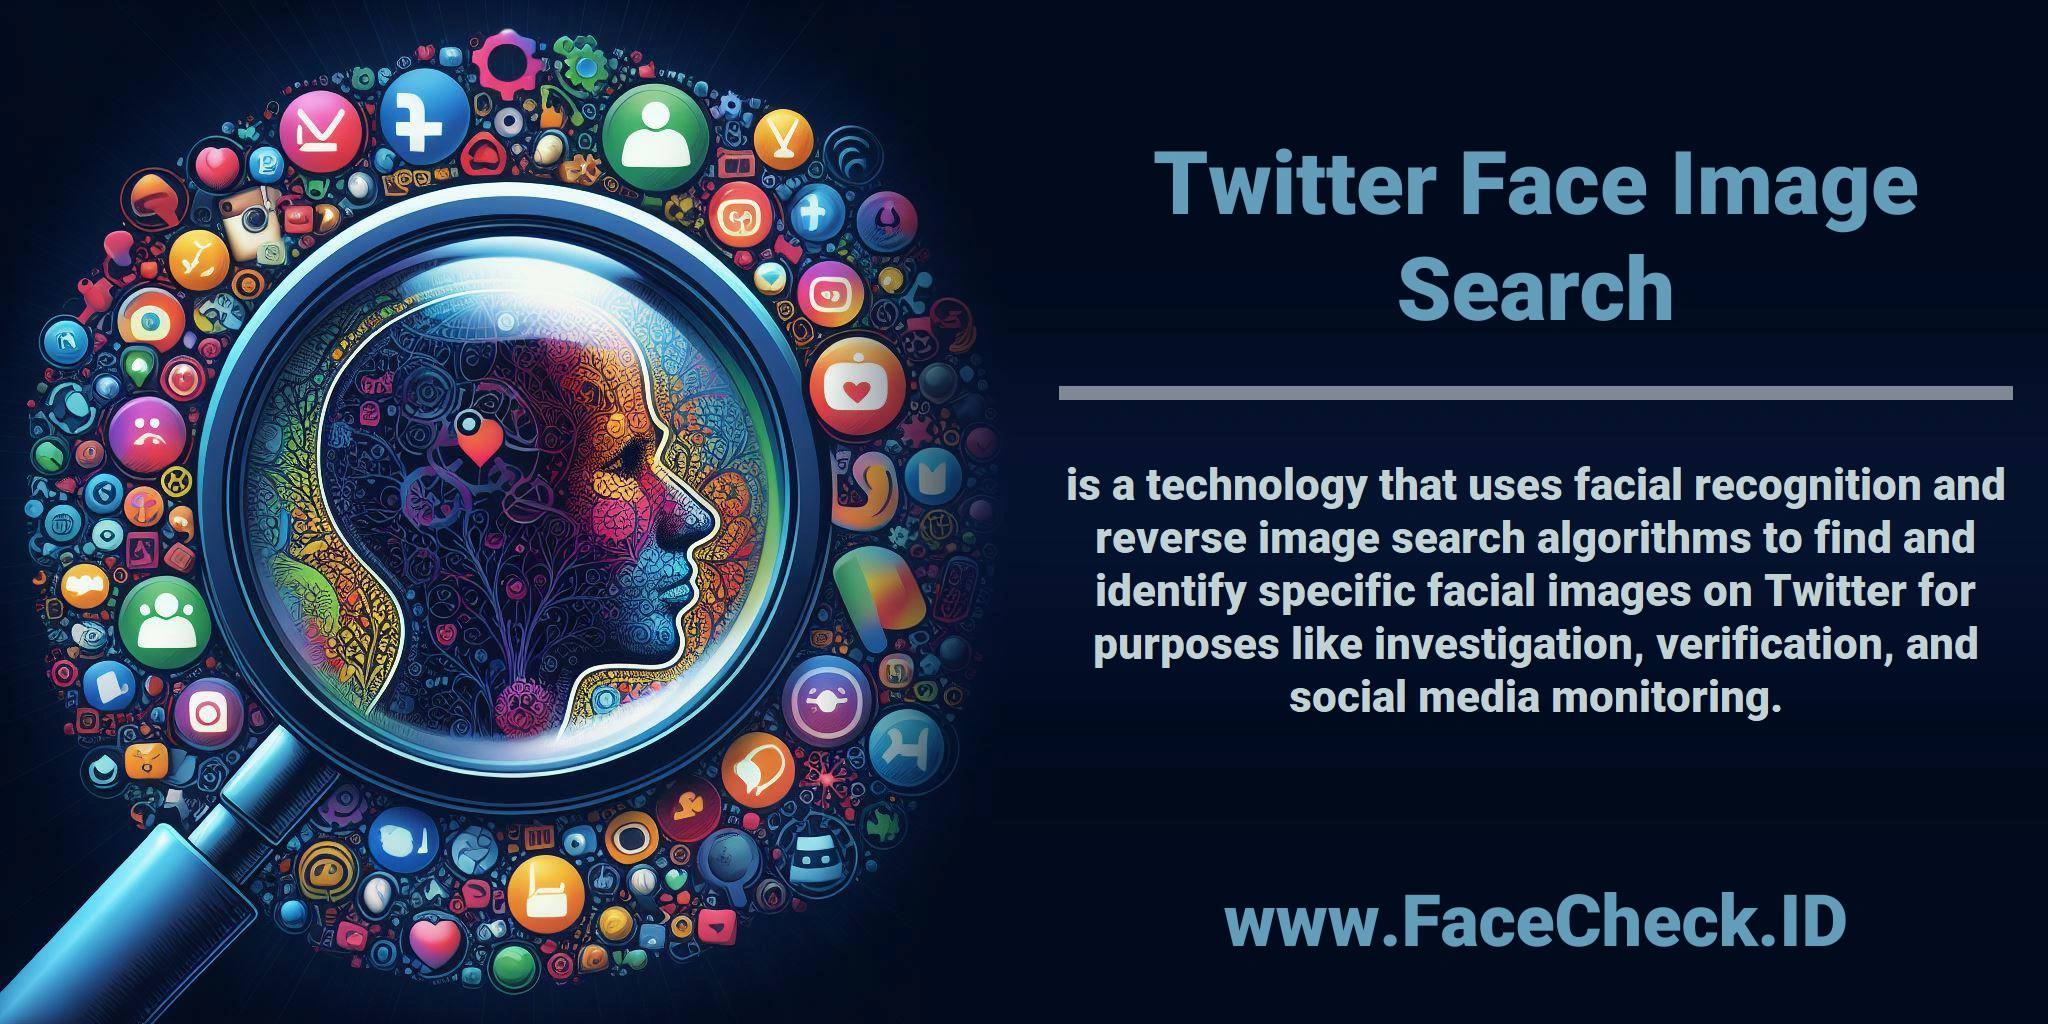 <b>Twitter Face Image Search</b> is a technology that uses facial recognition and reverse image search algorithms to find and identify specific facial images on Twitter for purposes like investigation, verification, and social media monitoring.